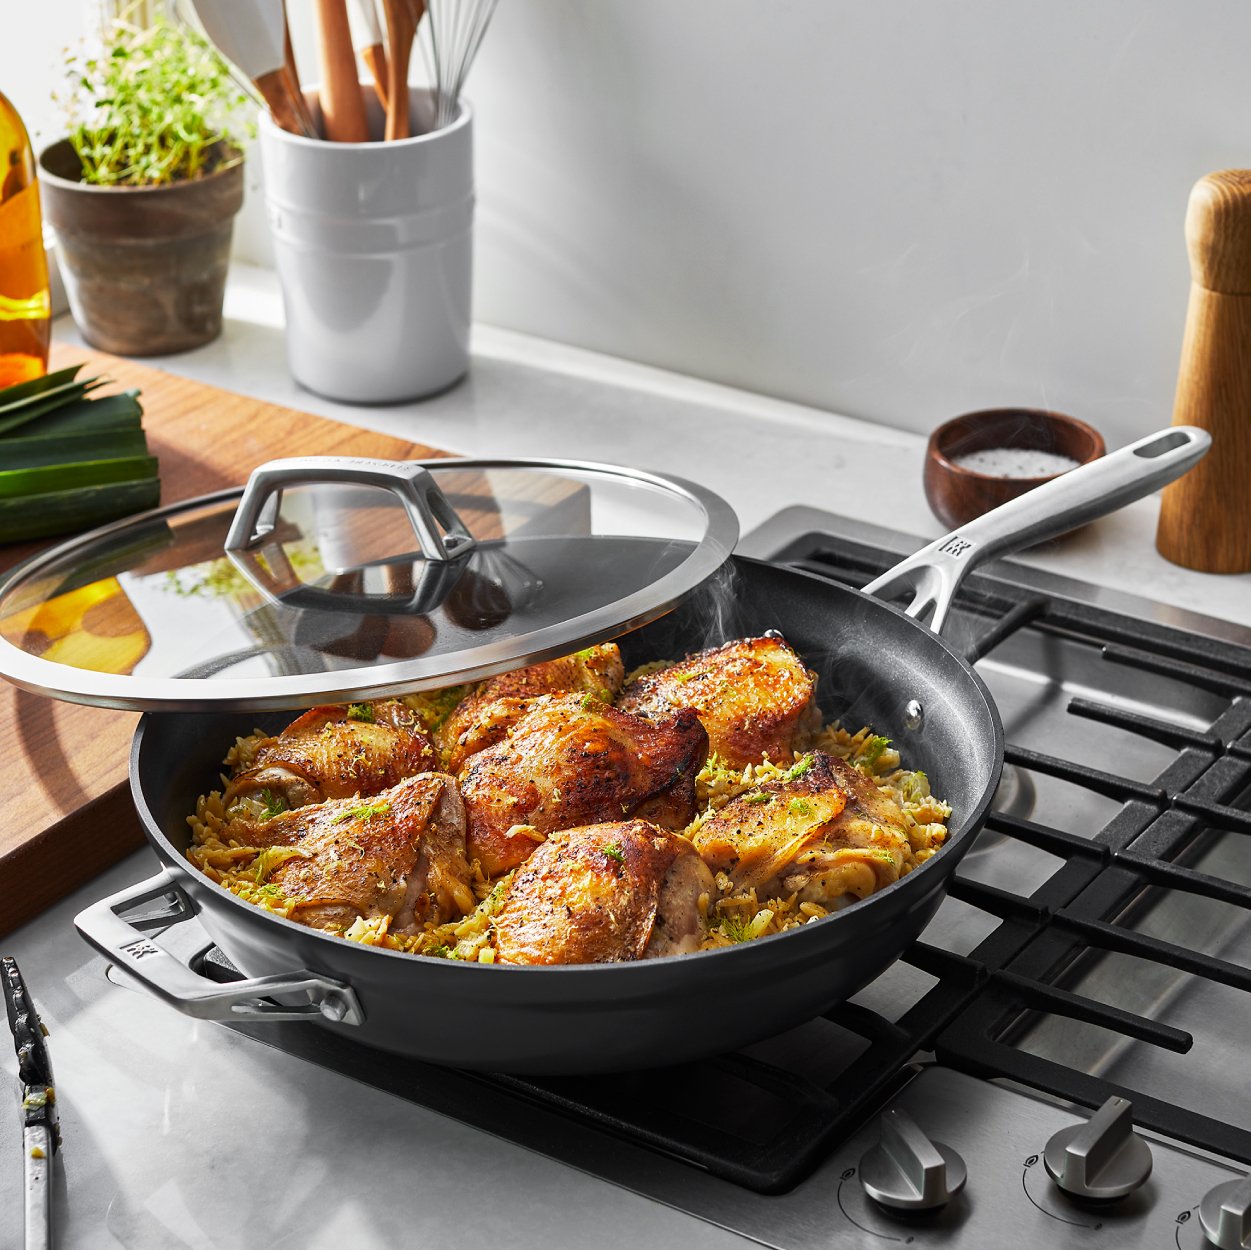 https://www.zwilling.com/on/demandware.static/-/Sites-zwilling-us-Library/default/dw91b9f4bf/images/product-content/masonry-content/zwilling/cookware/motion/ZW_Motion_Masonry_600-600_ZW_MotionMasonry_4.jpg